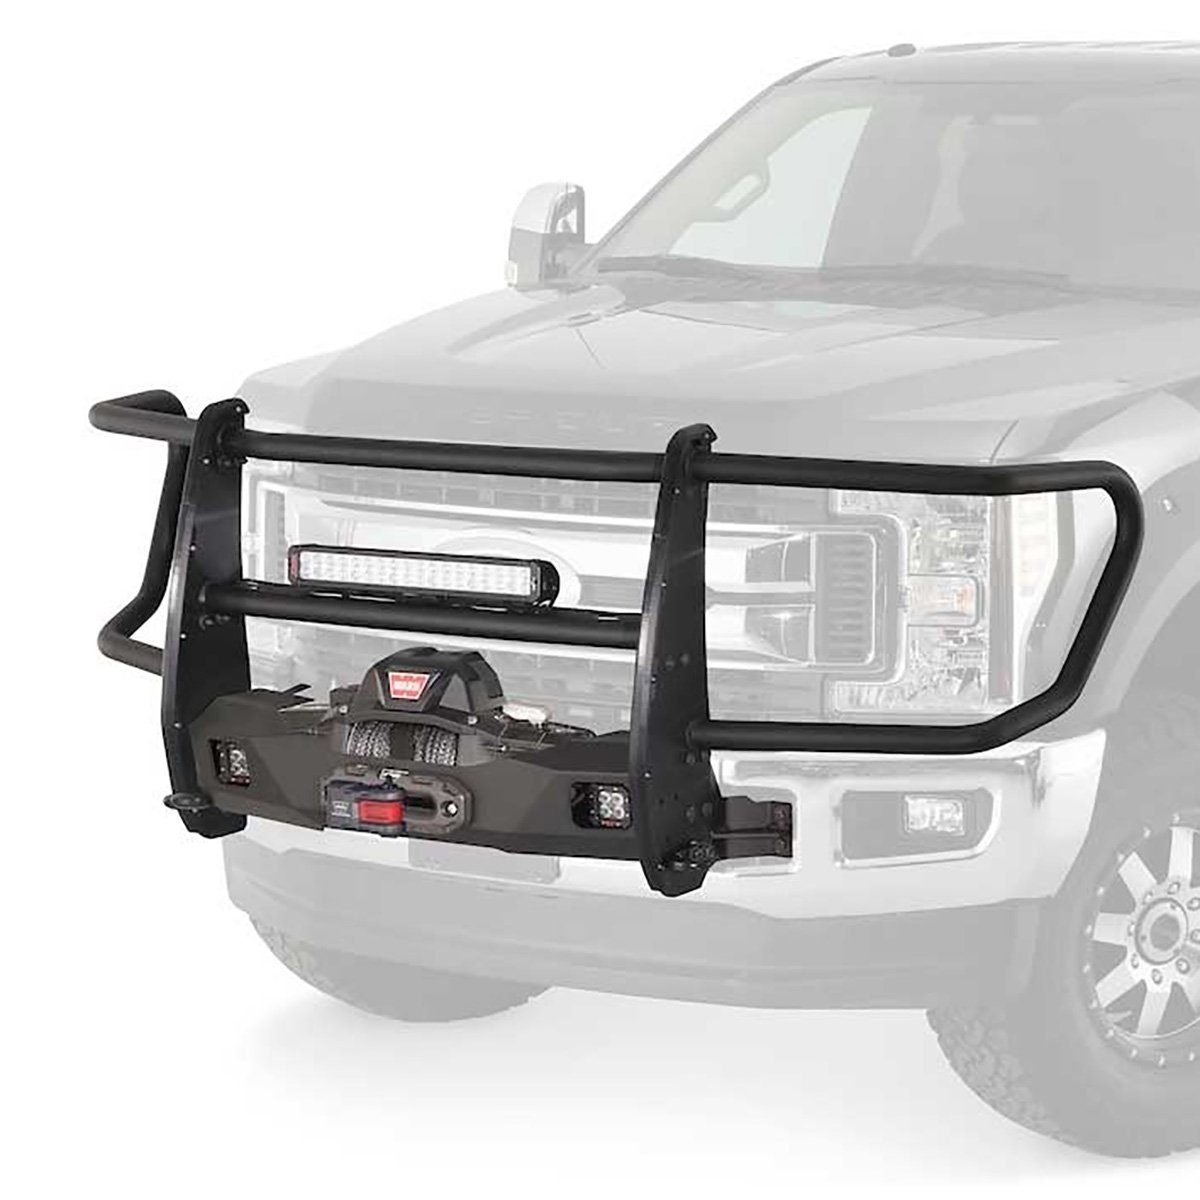 Trans4mer III Full Grille Guard fits Select Ford F-Series Super Duty and Ranger Pickup Trucks